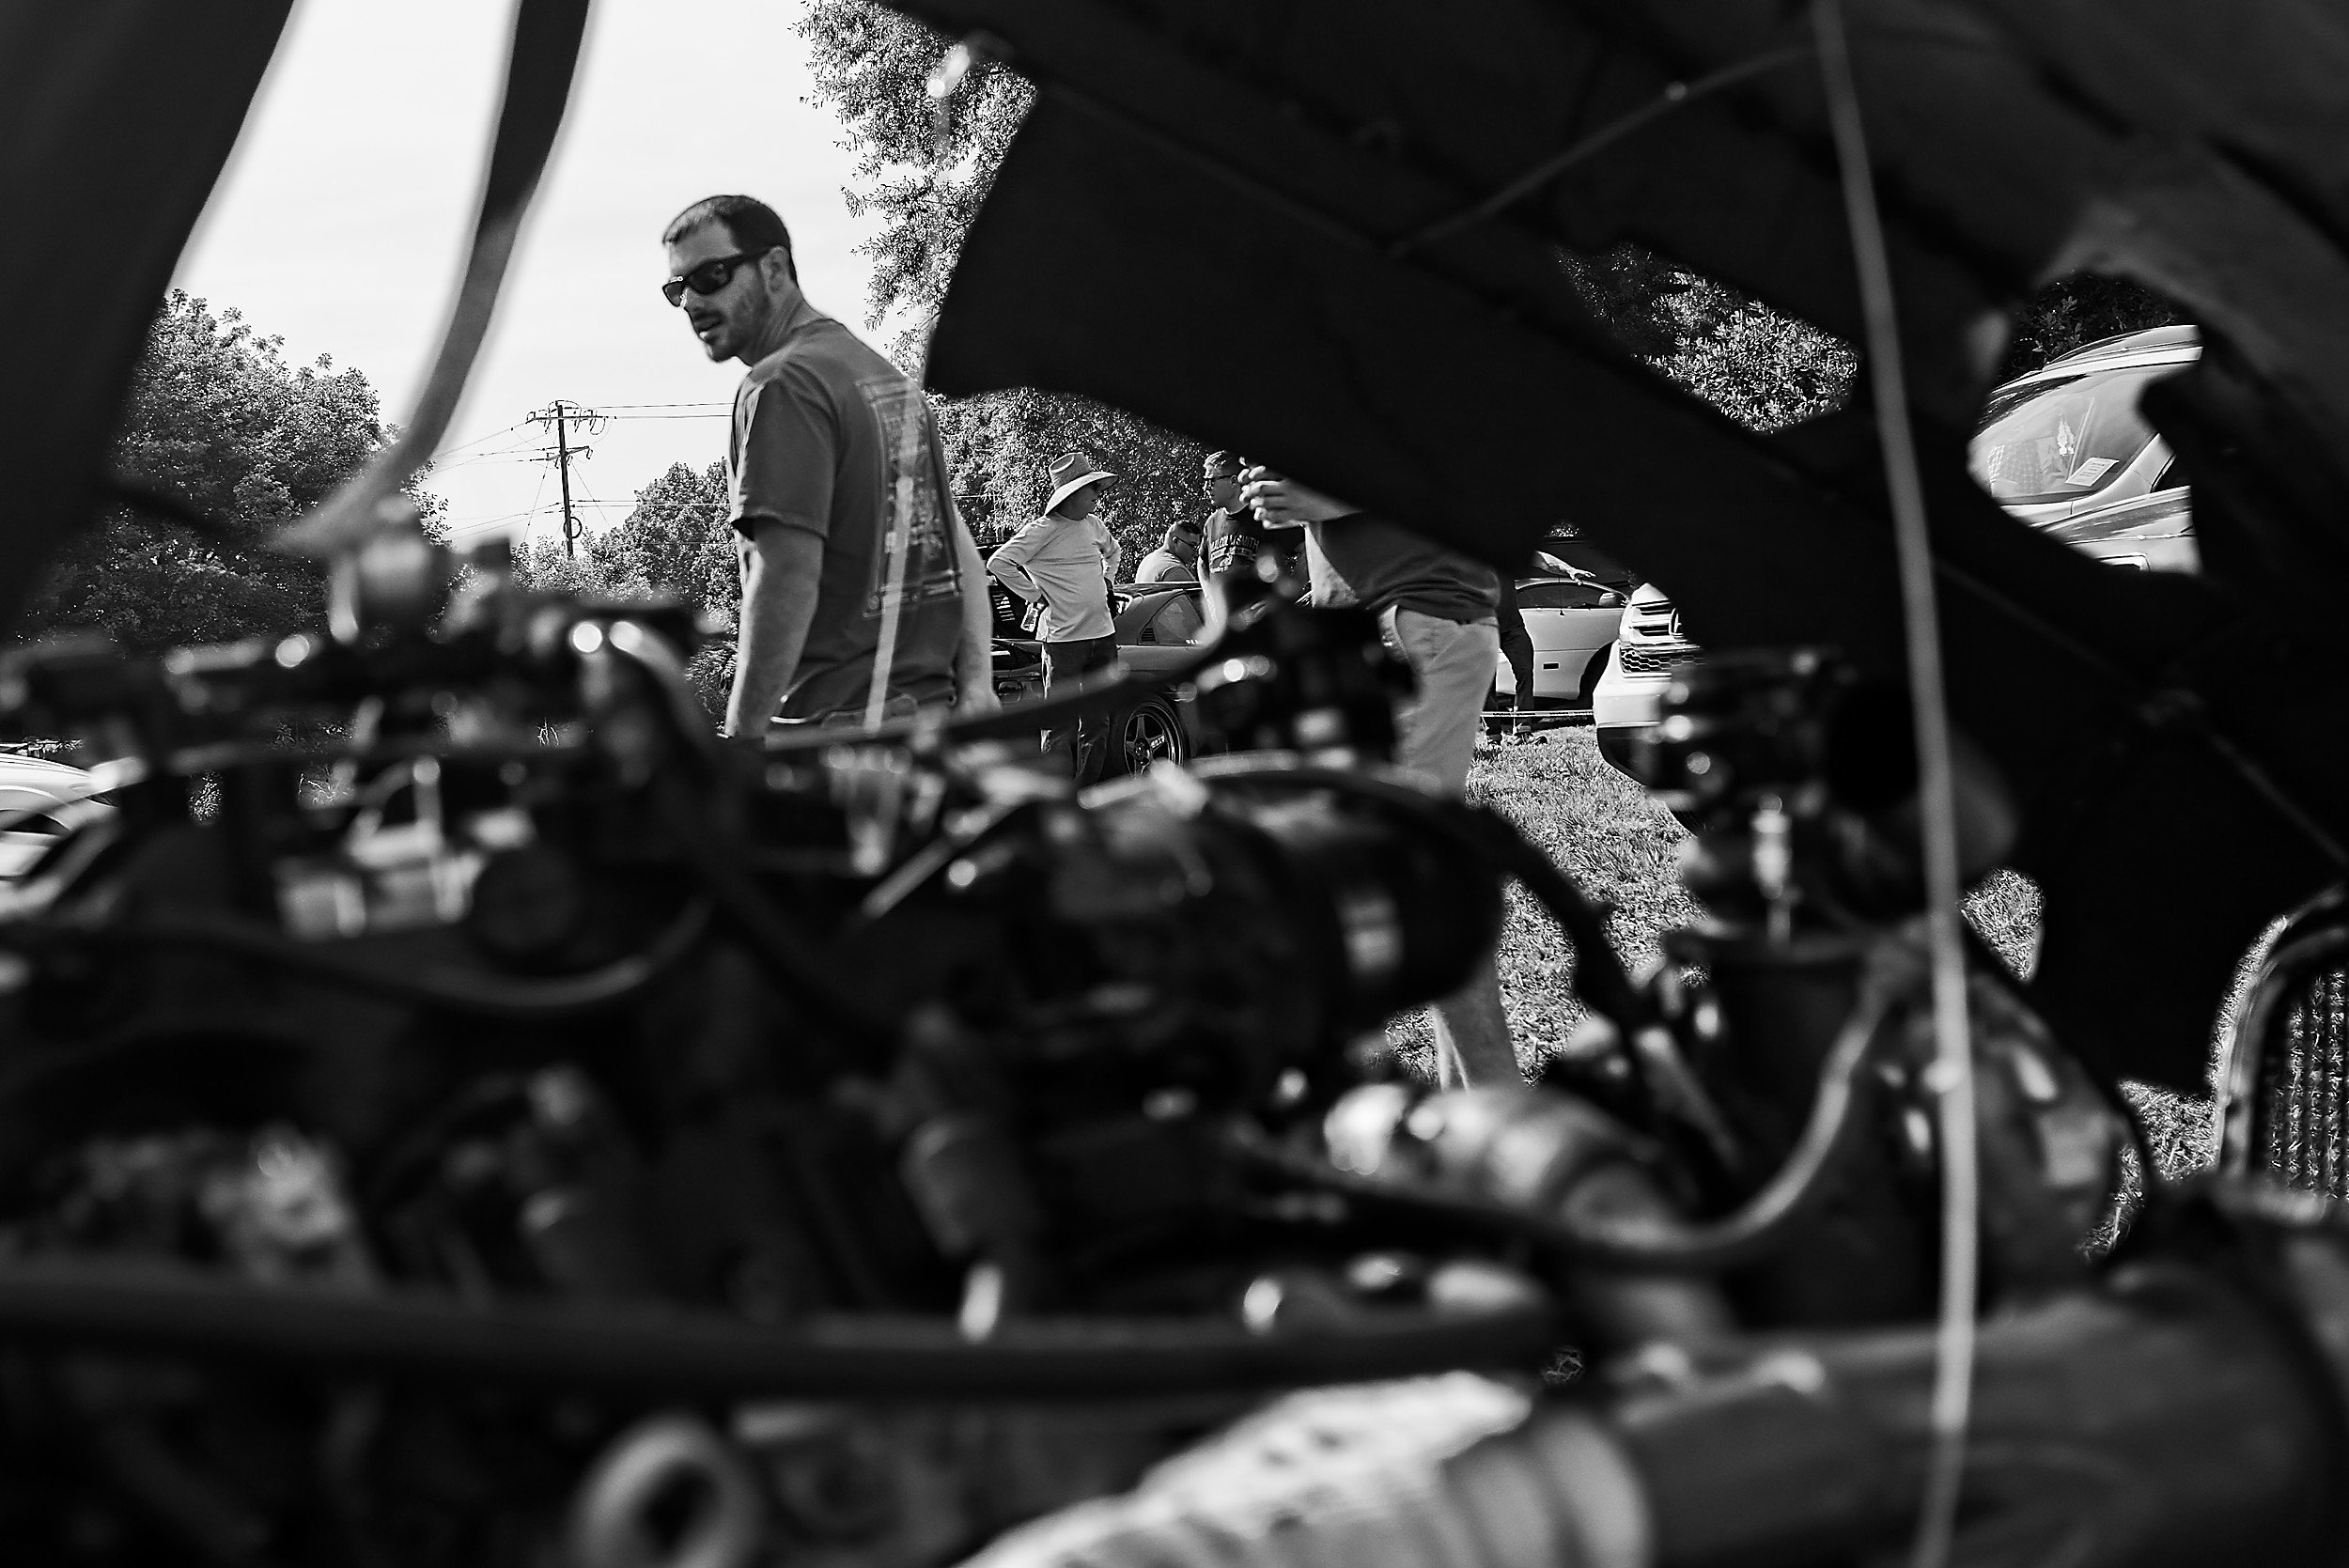  black and white image of a man with sunglases looking at the engine of a vintage car 